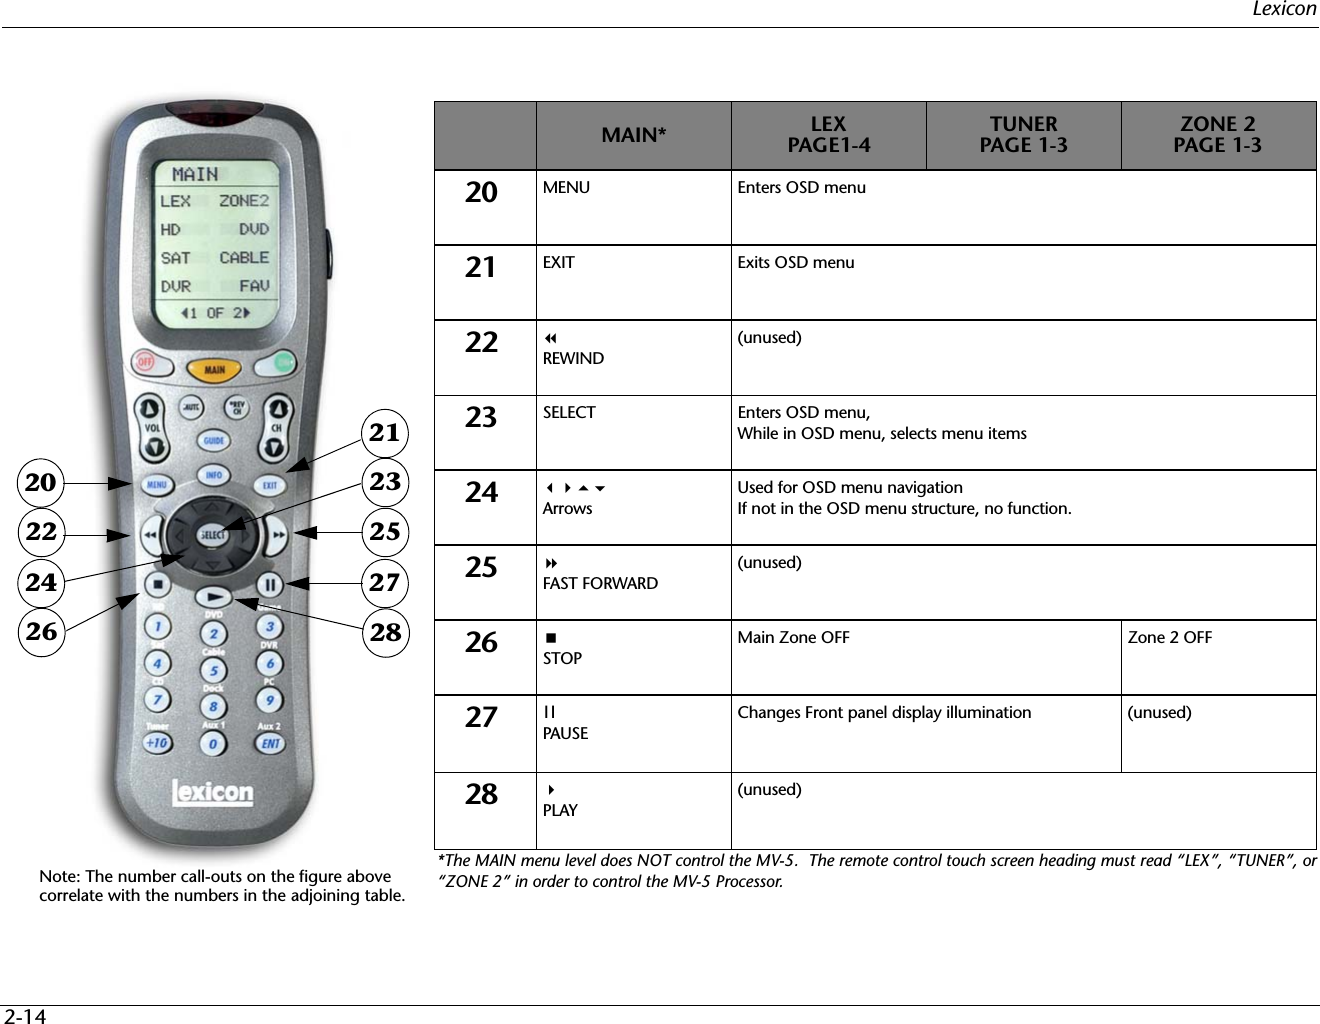 Lexicon2-14*The MAIN menu level does NOT control the MV-5.  The remote control touch screen heading must read “LEX”, “TUNER”, or“ZONE 2” in order to control the MV-5 Processor.Note: The number call-outs on the figure abovecorrelate with the numbers in the adjoining table.202224262123252728MAIN* LEX PAGE1-4TUNERPAGE 1-3ZONE 2 PAGE 1-320 MENU Enters OSD menu21 EXIT Exits OSD menu22 REWIND(unused)23 SELECT Enters OSD menu,While in OSD menu, selects menu items24 ArrowsUsed for OSD menu navigationIf not in the OSD menu structure, no function.25 FAST FORWARD(unused)26 STOPMain Zone OFF Zone 2 OFF27 ||PAUSEChanges Front panel display illumination (unused)28  PLAY(unused)